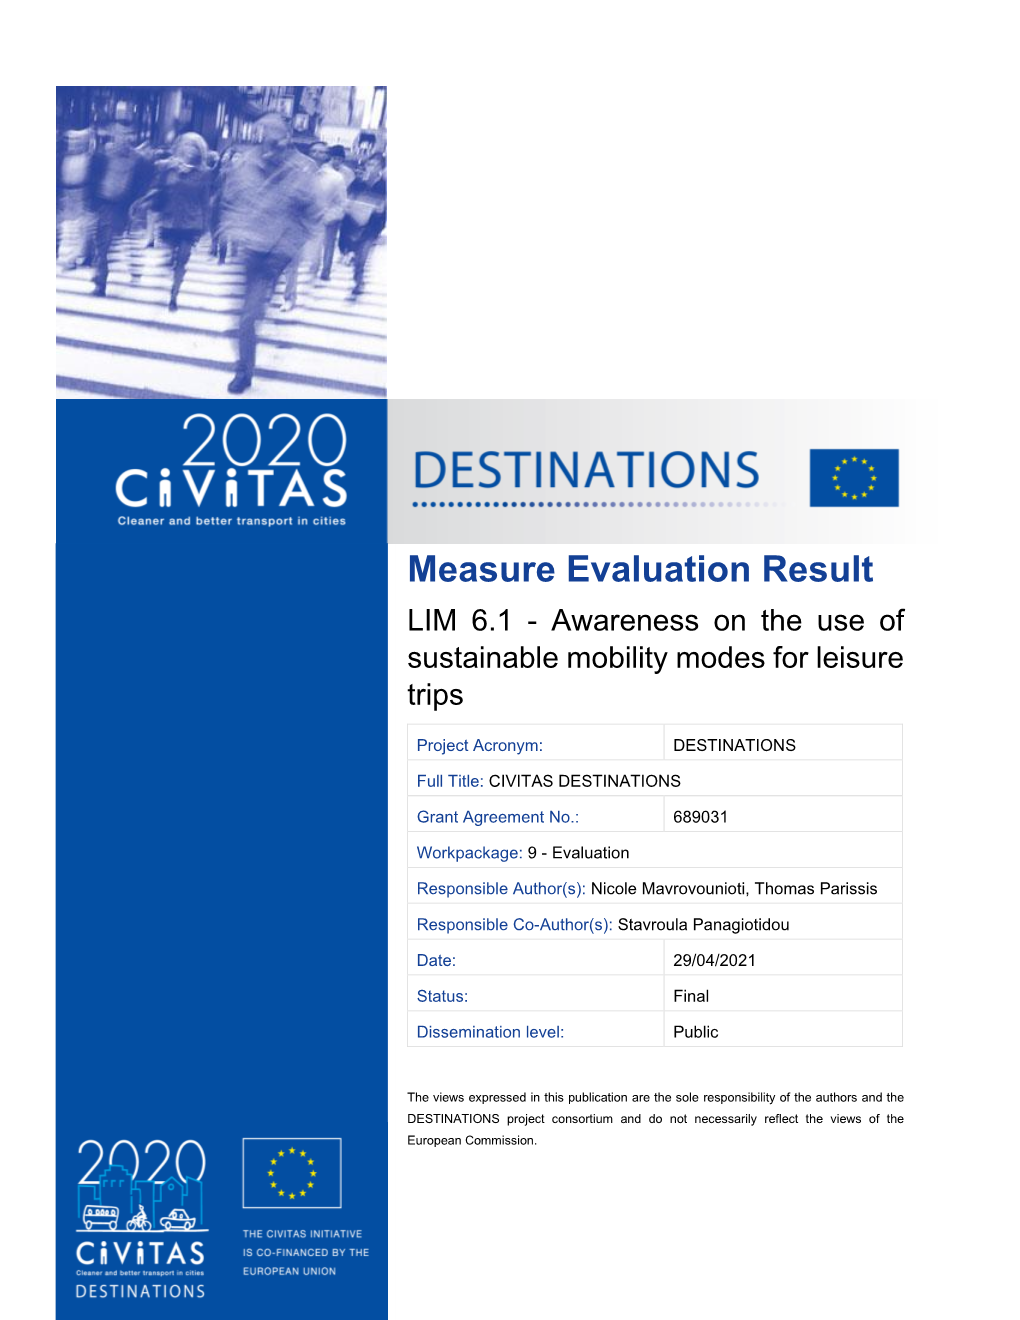 LIM 6.1 - Awareness on the Use of Sustainable Mobility Modes for Leisure Trips